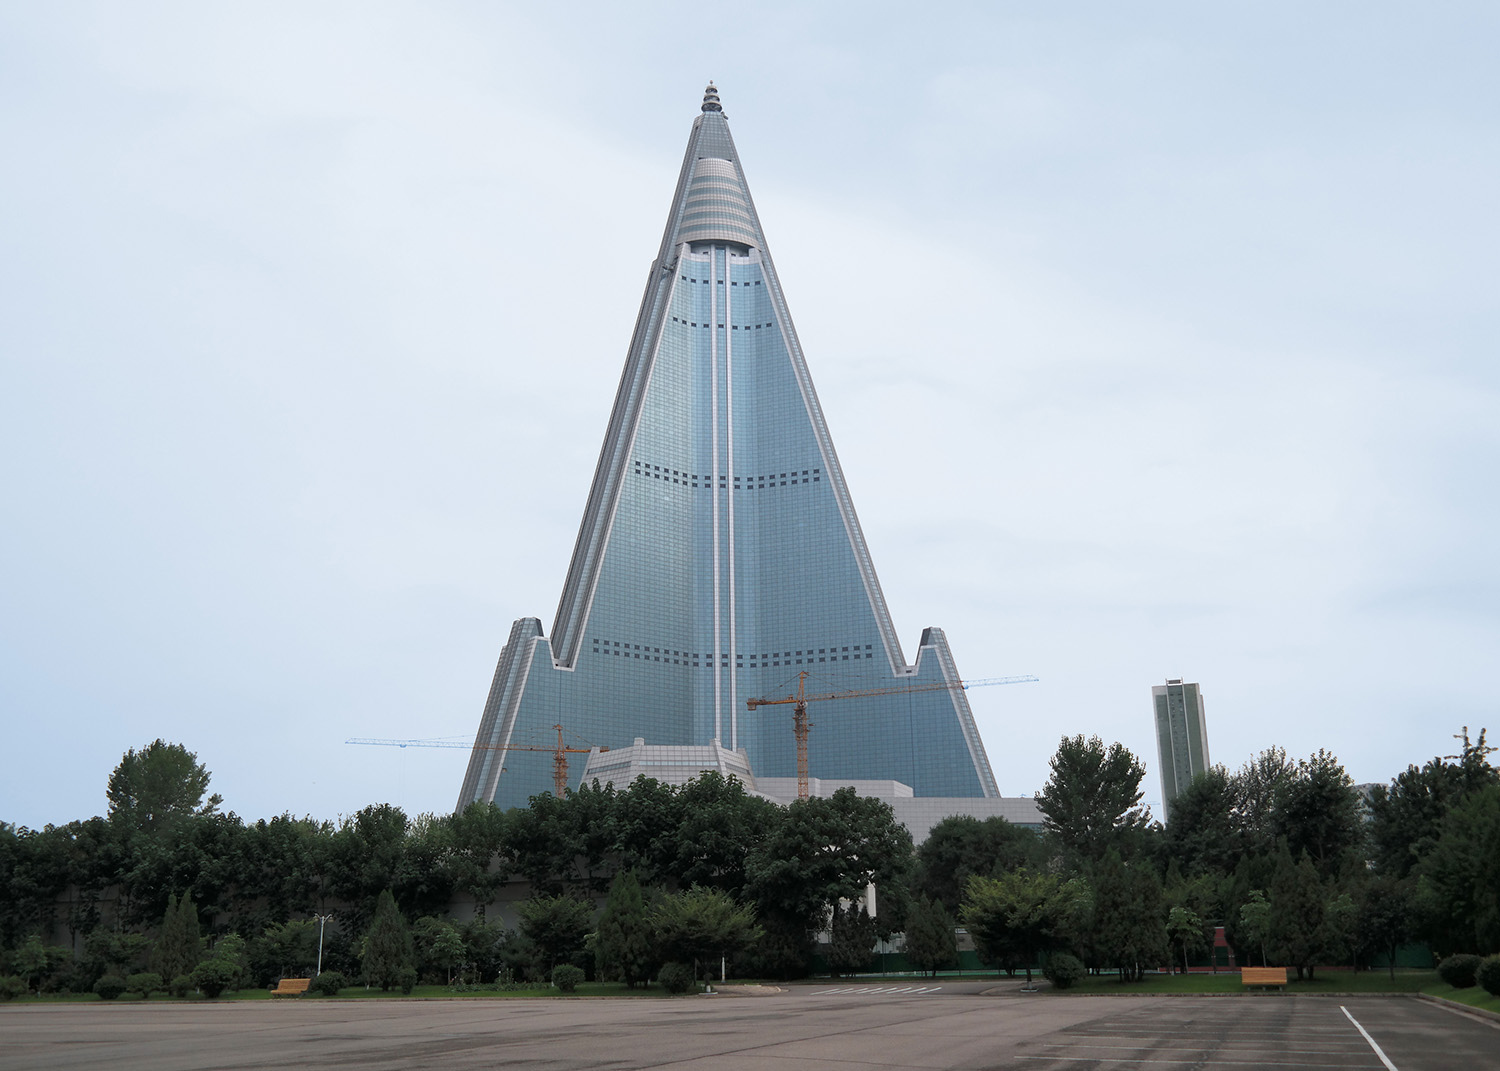 Ryugyong Hotel, aka The Hotel of Doom. Its construction began in 1987 – it is still incomplete 33 years later